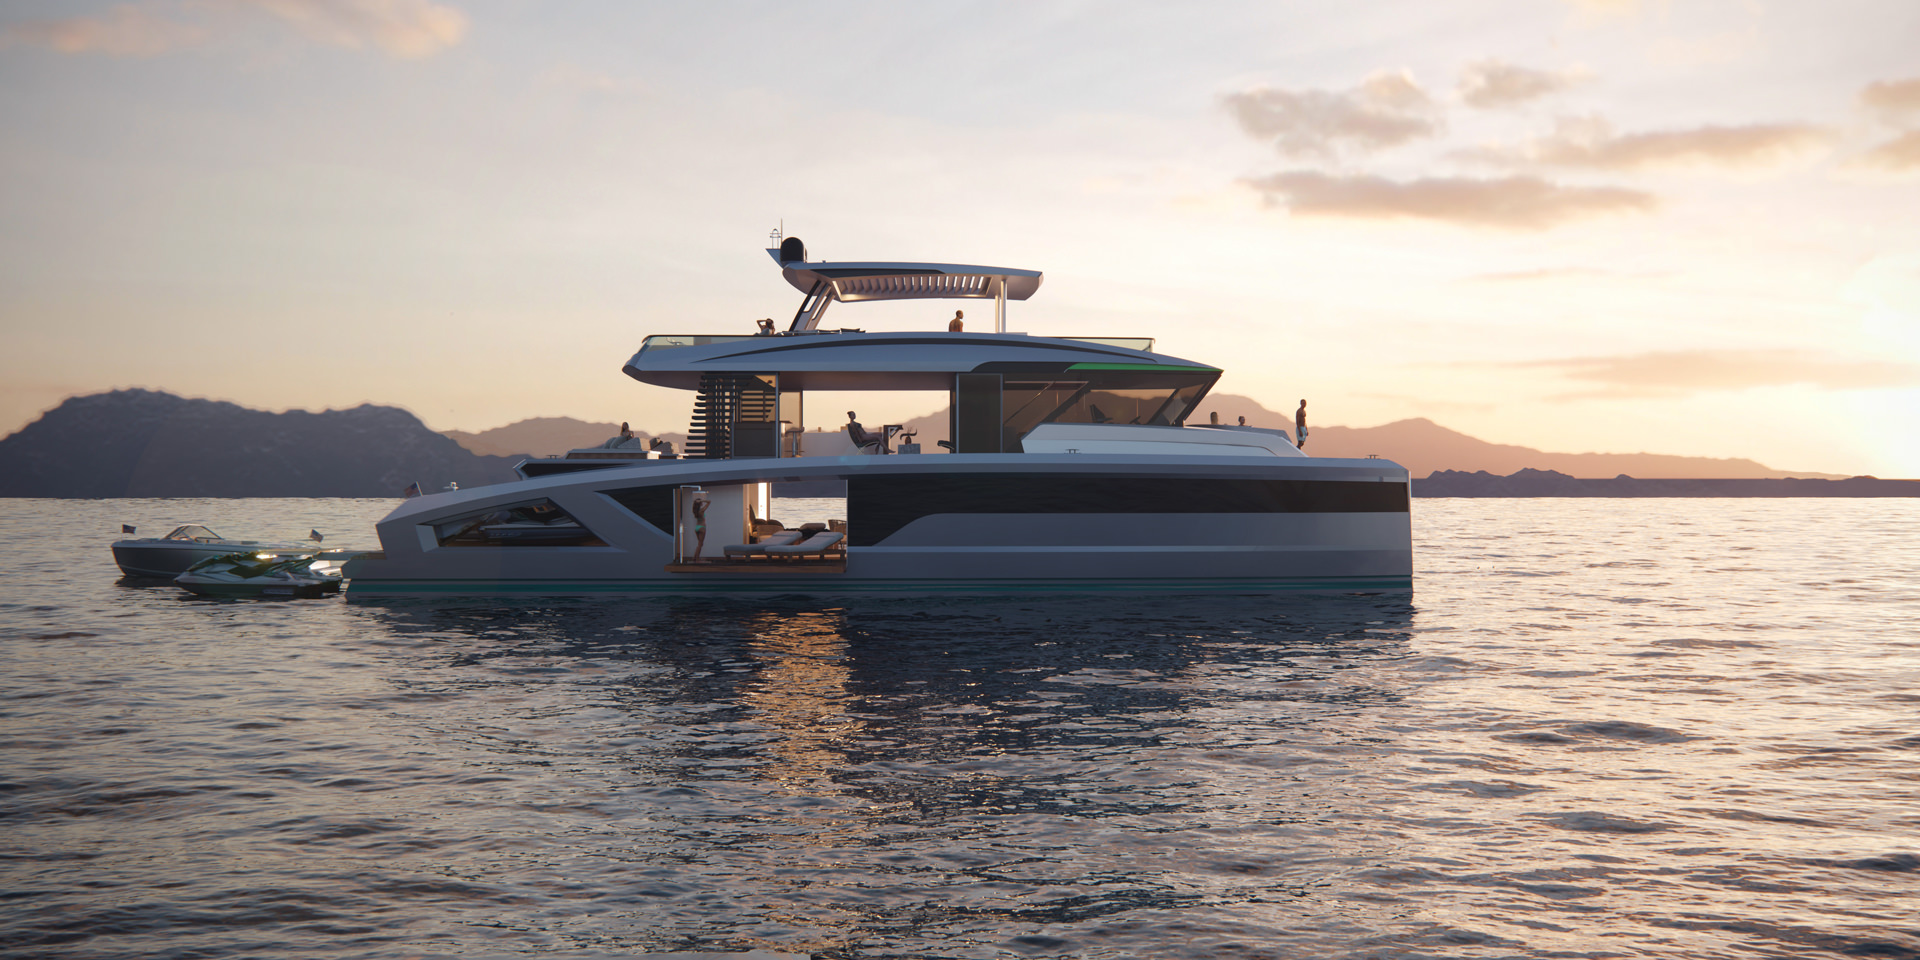 Lunas studio offers photo real yacht rendering services for maritime transportation and naval industry